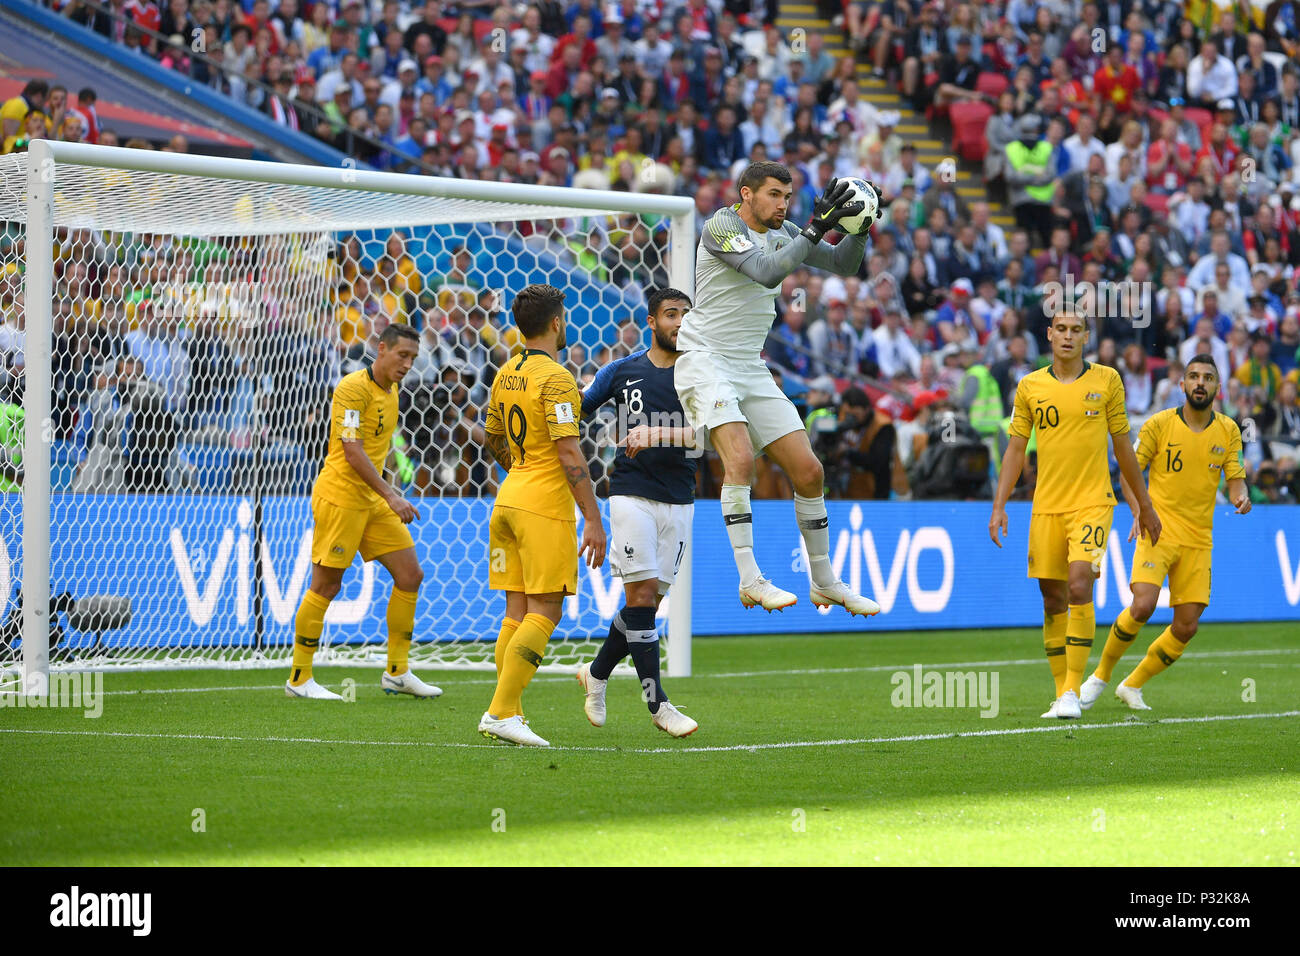 Kazan, Russia. 16th June, 2018. goalie Mathew RYAN (AUS) parries a ball, penalty area scene.Action, parade. France (FRA) -Australia (AUS) 2-1, Preliminary Round, Group C, Game 5, on 16.06.2018 in Kazan, Kazan Arena. Football World Cup 2018 in Russia from 14.06. - 15.07.2018. | usage worldwide Credit: dpa/Alamy Live News Stock Photo